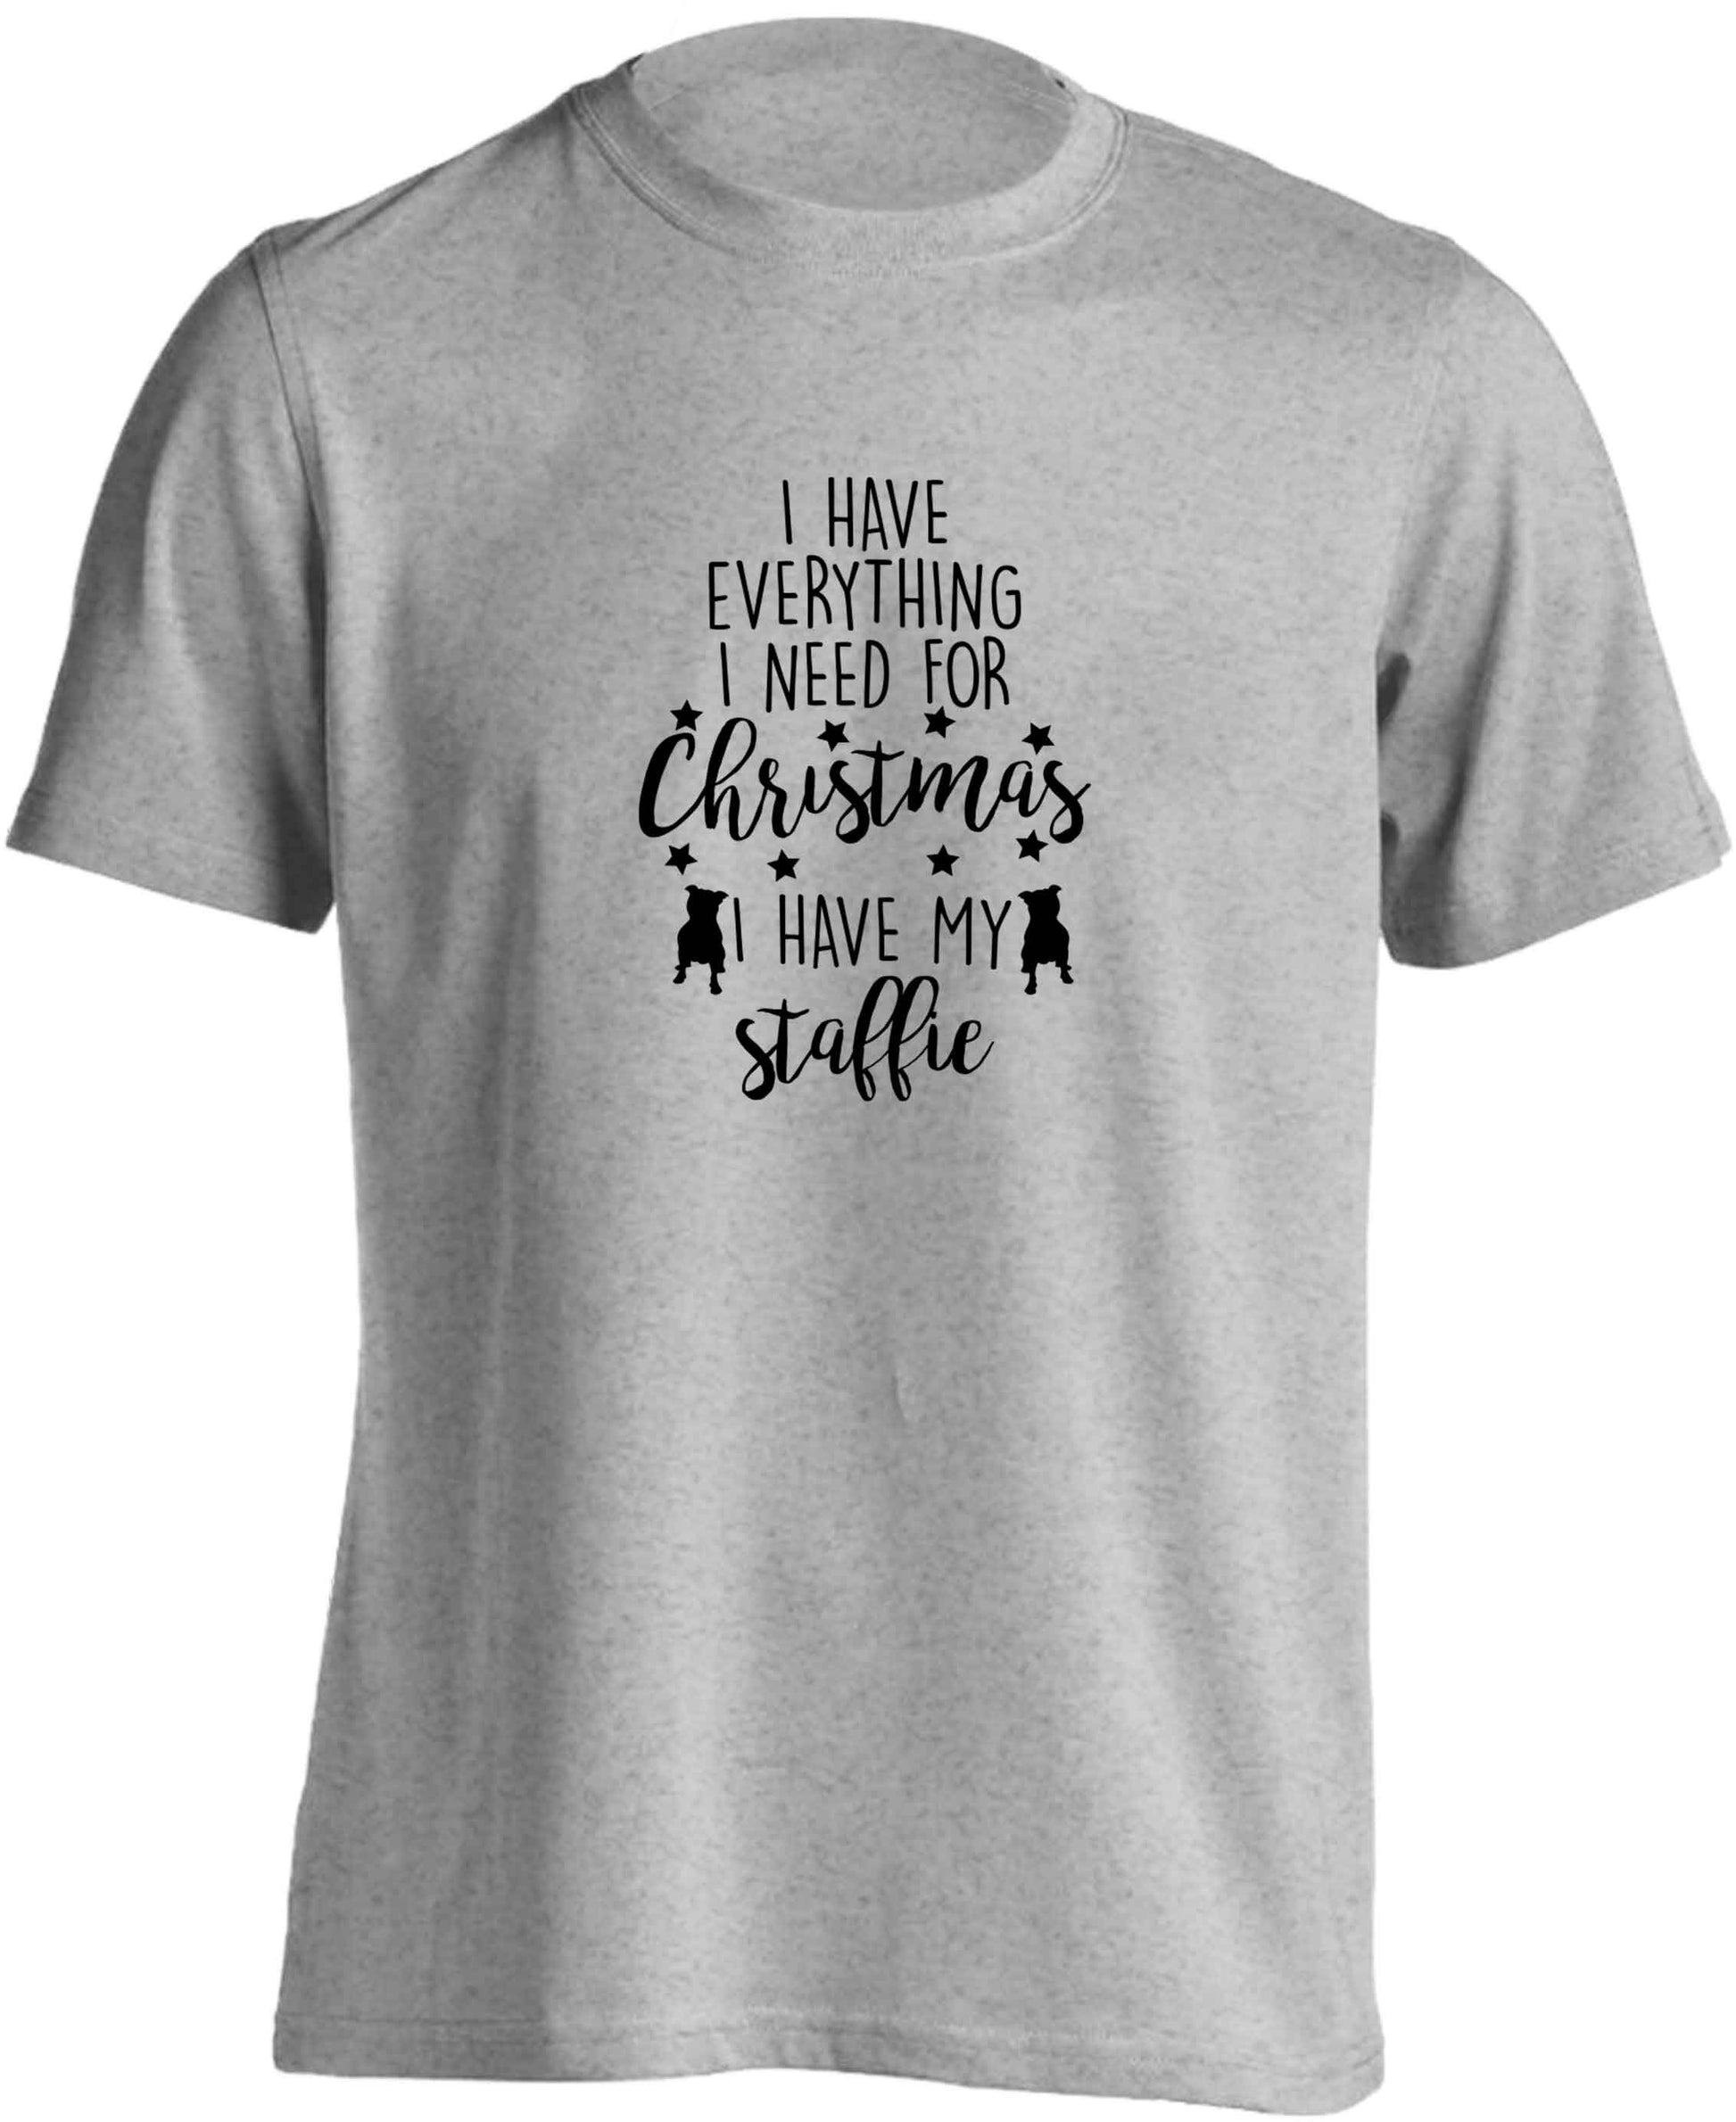 I have everything I need for Christmas I have my staffie adults unisex grey Tshirt 2XL